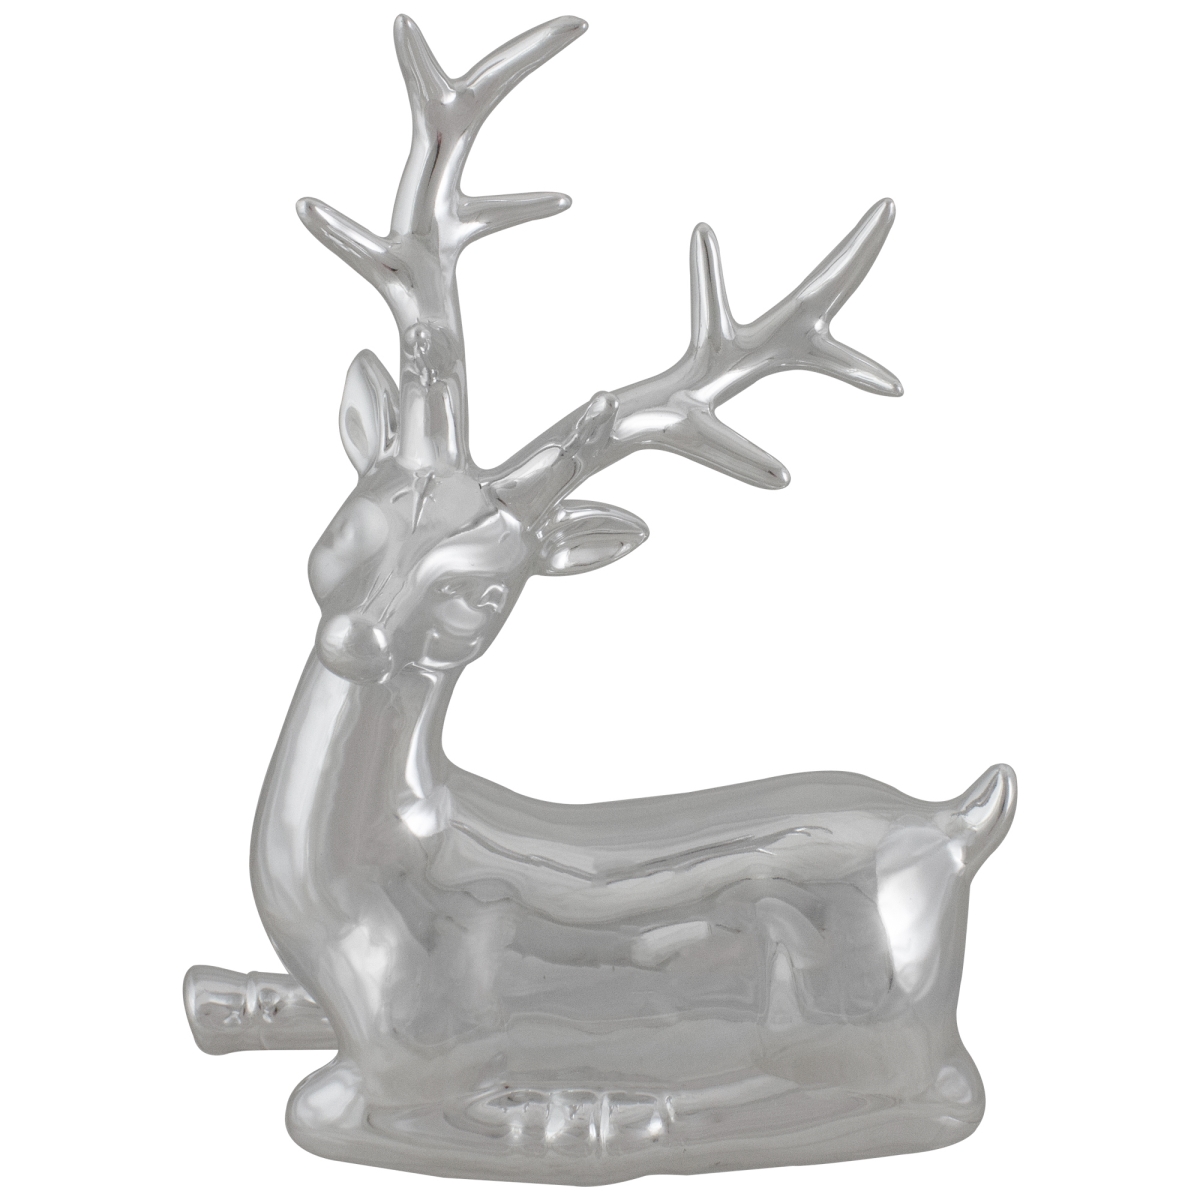 Picture of NorthLight 34315127 10 in. Sitting Reindeer Christmas Tabletop Decor, Metallic Silver